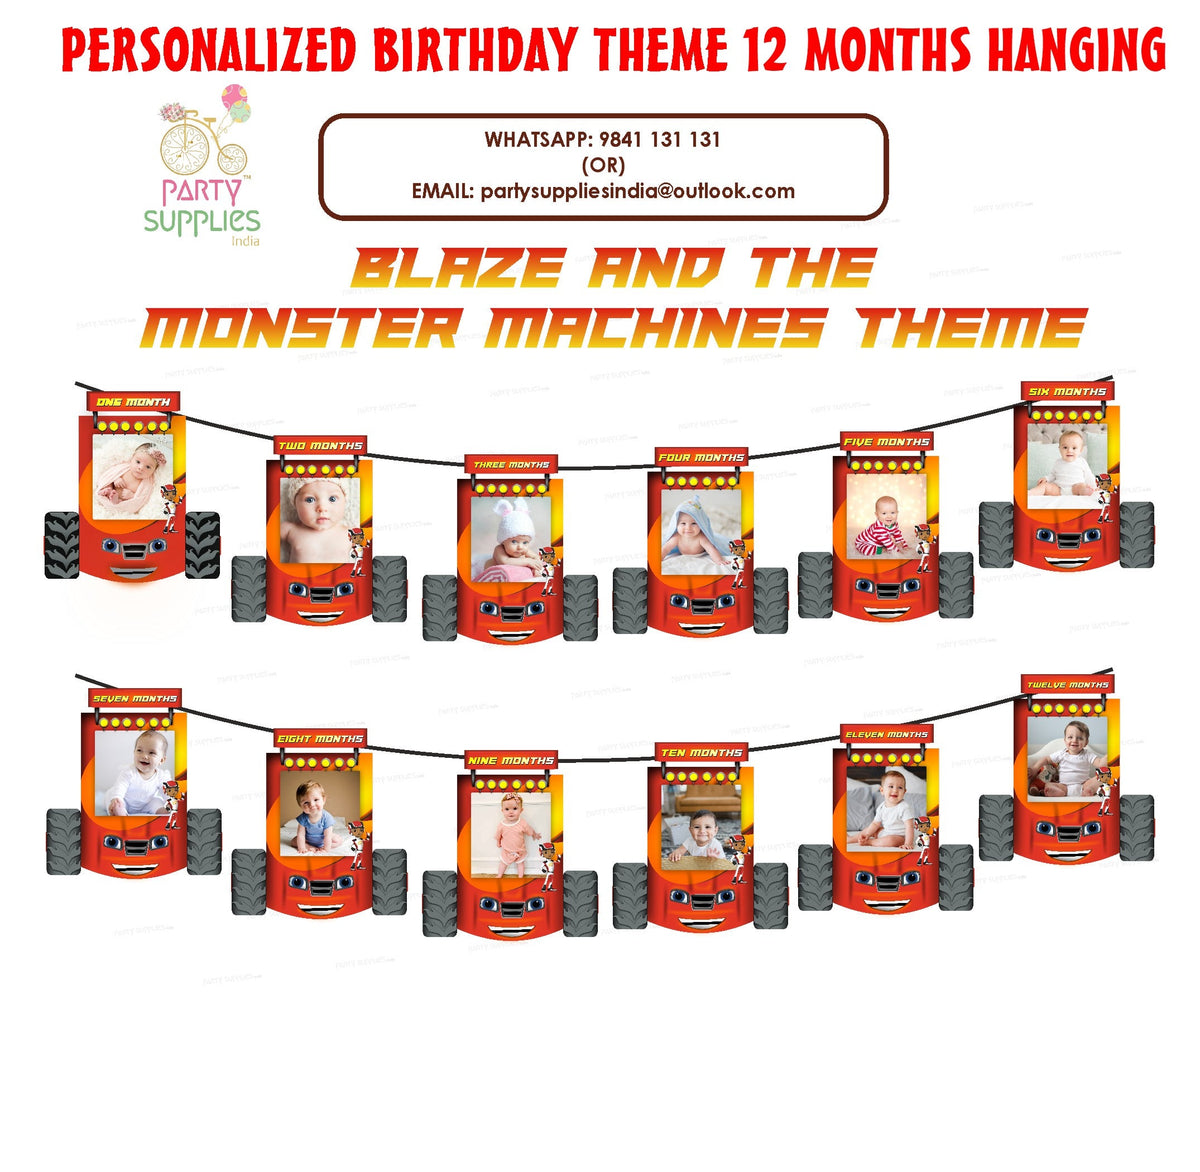 PSI Blaze and the Monster Theme 12 Months Photo Banner